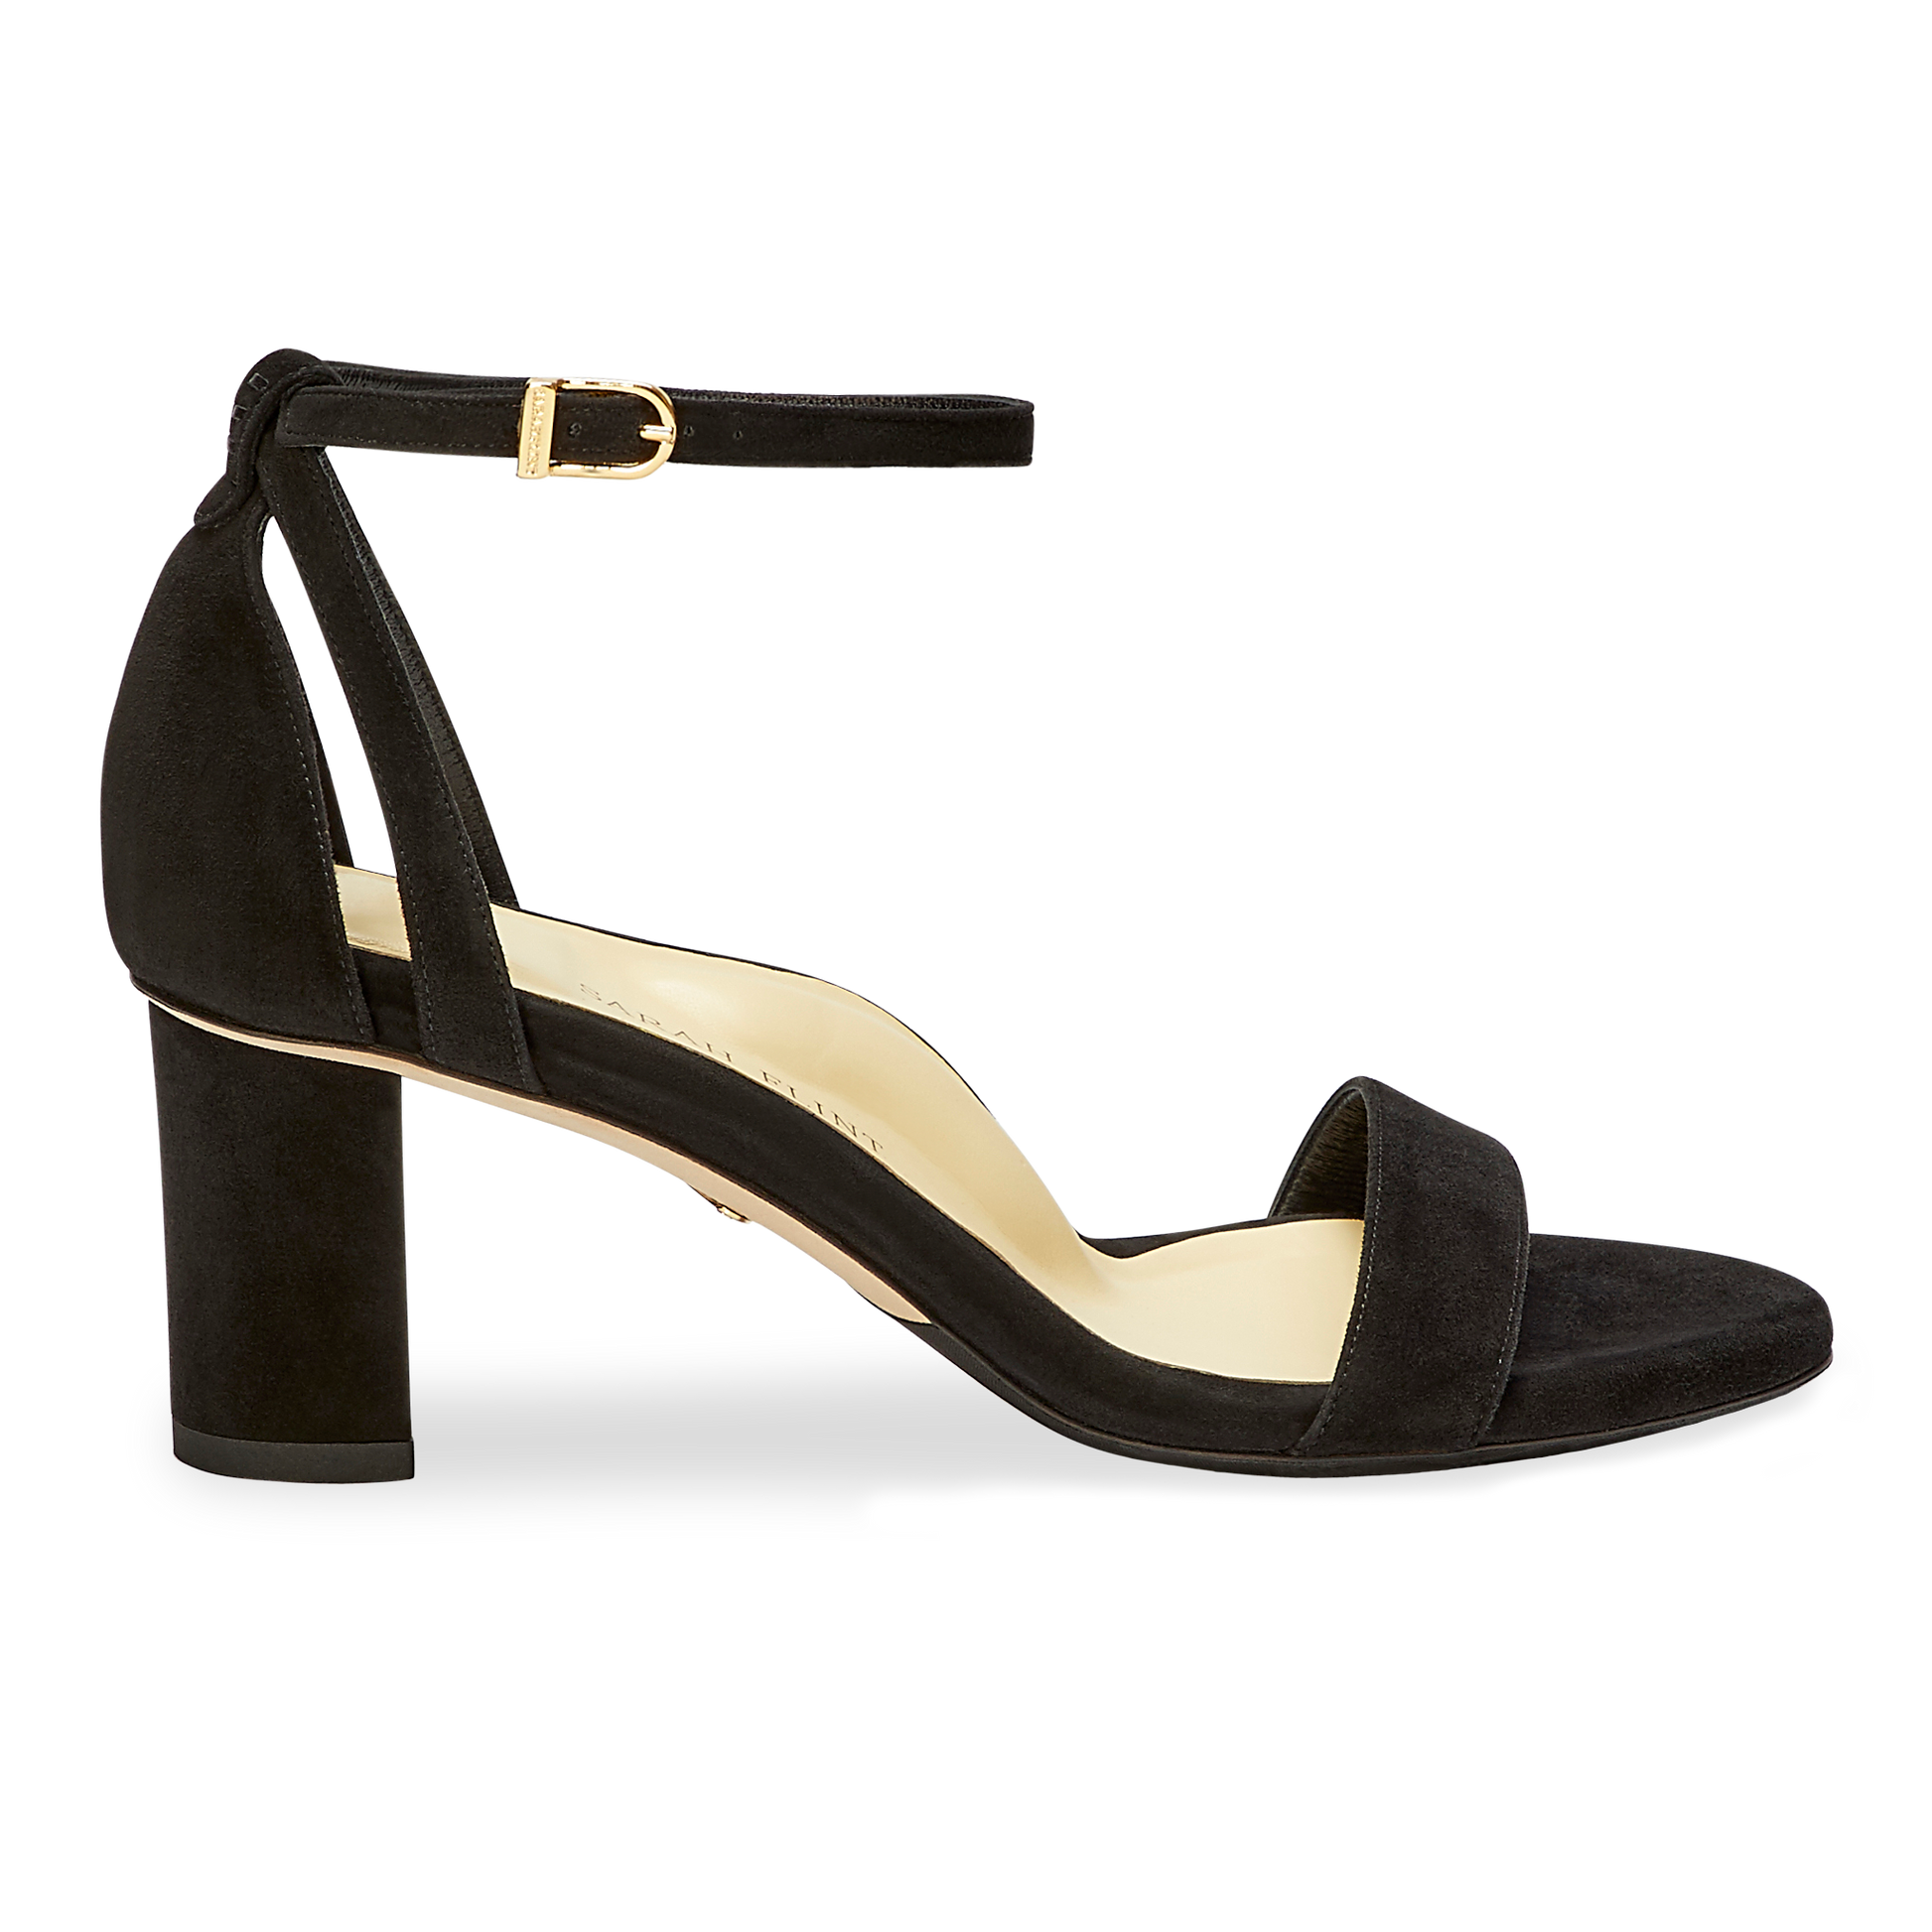 60mm Italian Made Perfect Block Sandal in Black Suede